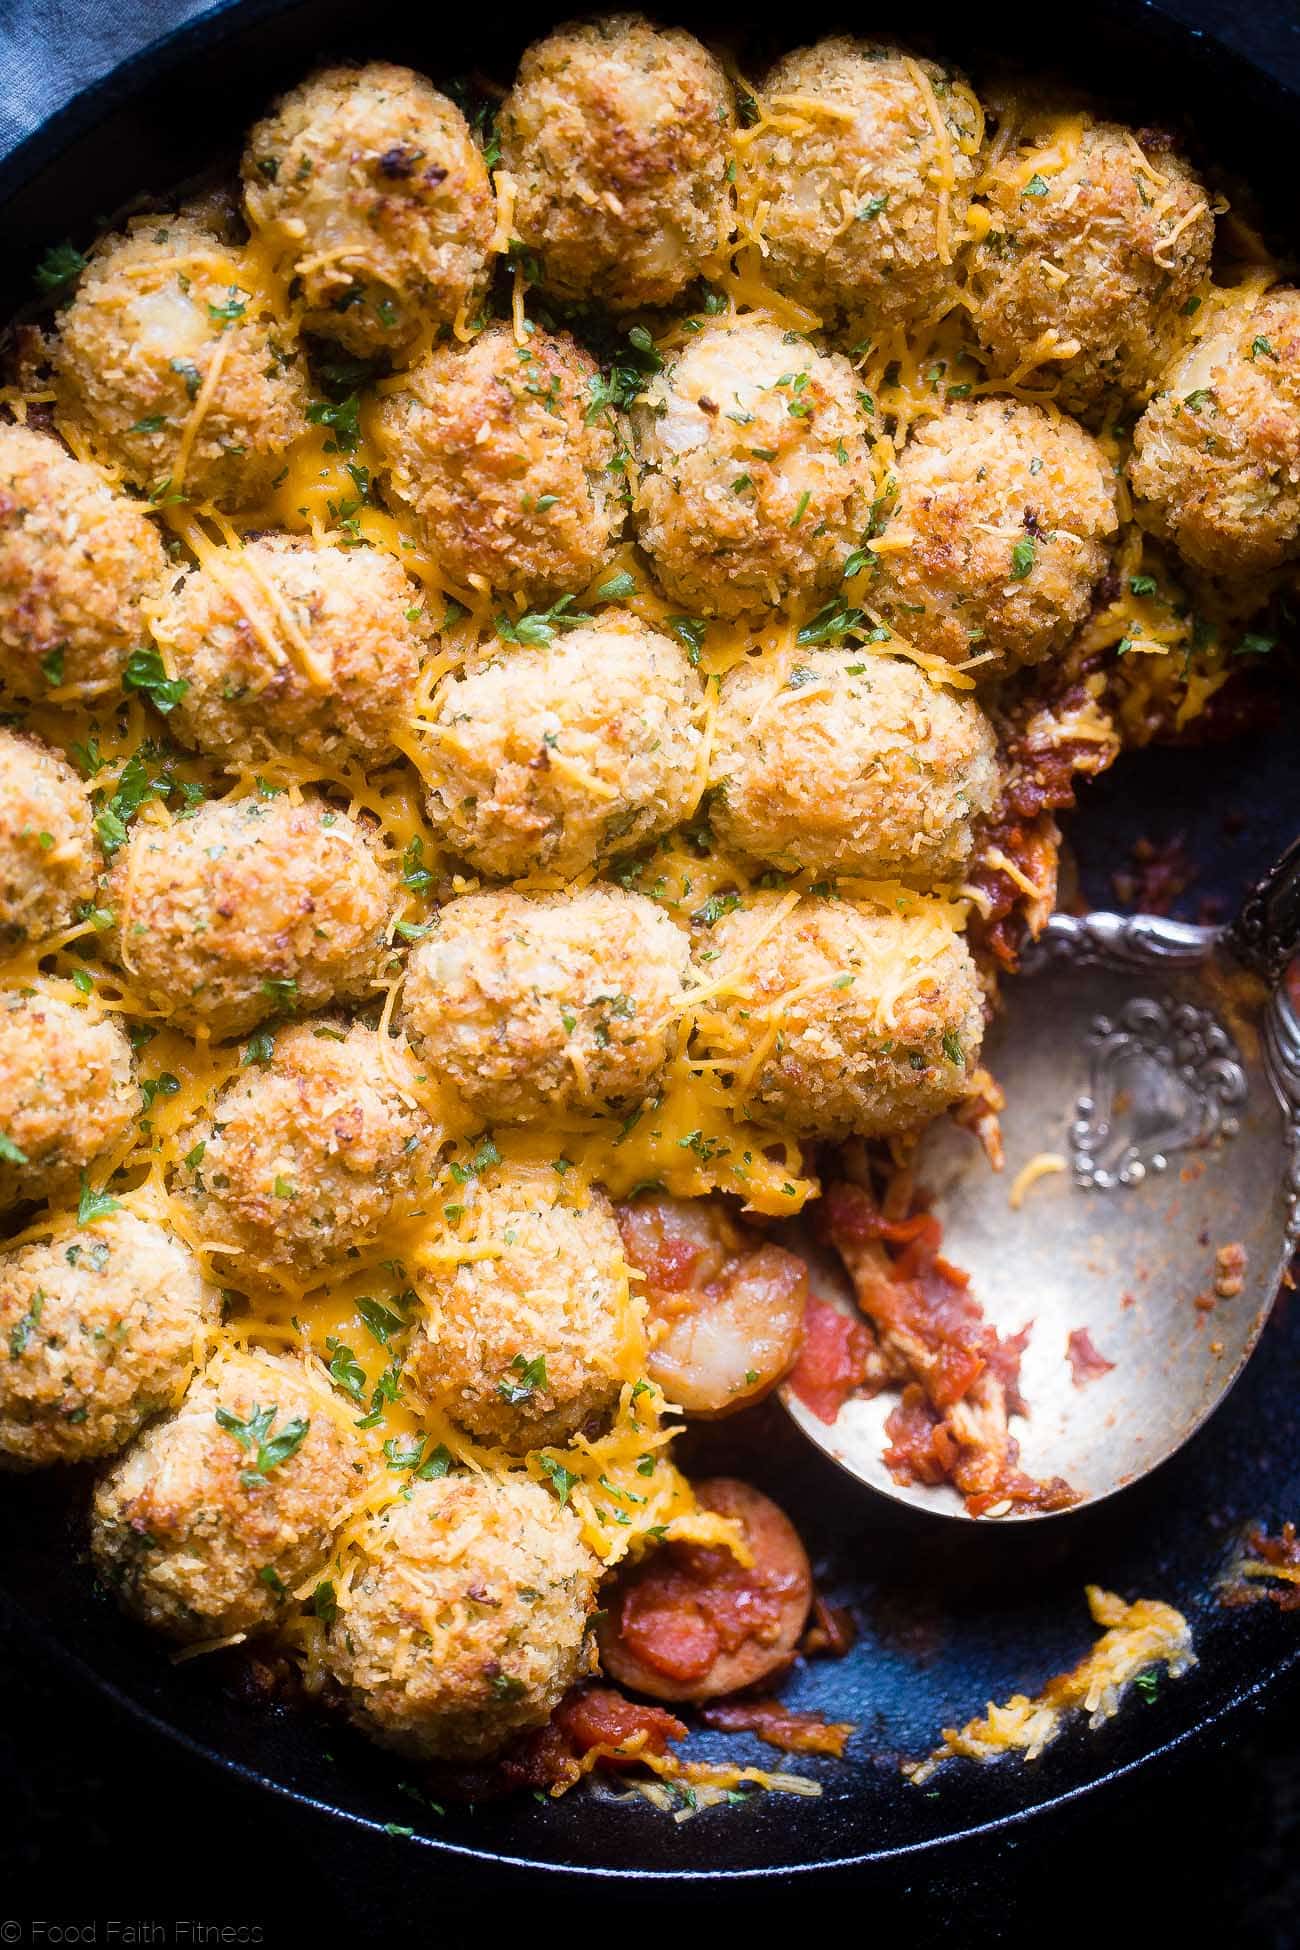 Cajun Cauliflower Tot Casserole - This lower carb, cheesy casserole is made of spicy, Cajun cauliflower tater tots! It's a healthy, gluten free weeknight dinner that the whole family will love! | Foodfaithfitness.com | @FoodFaithFit